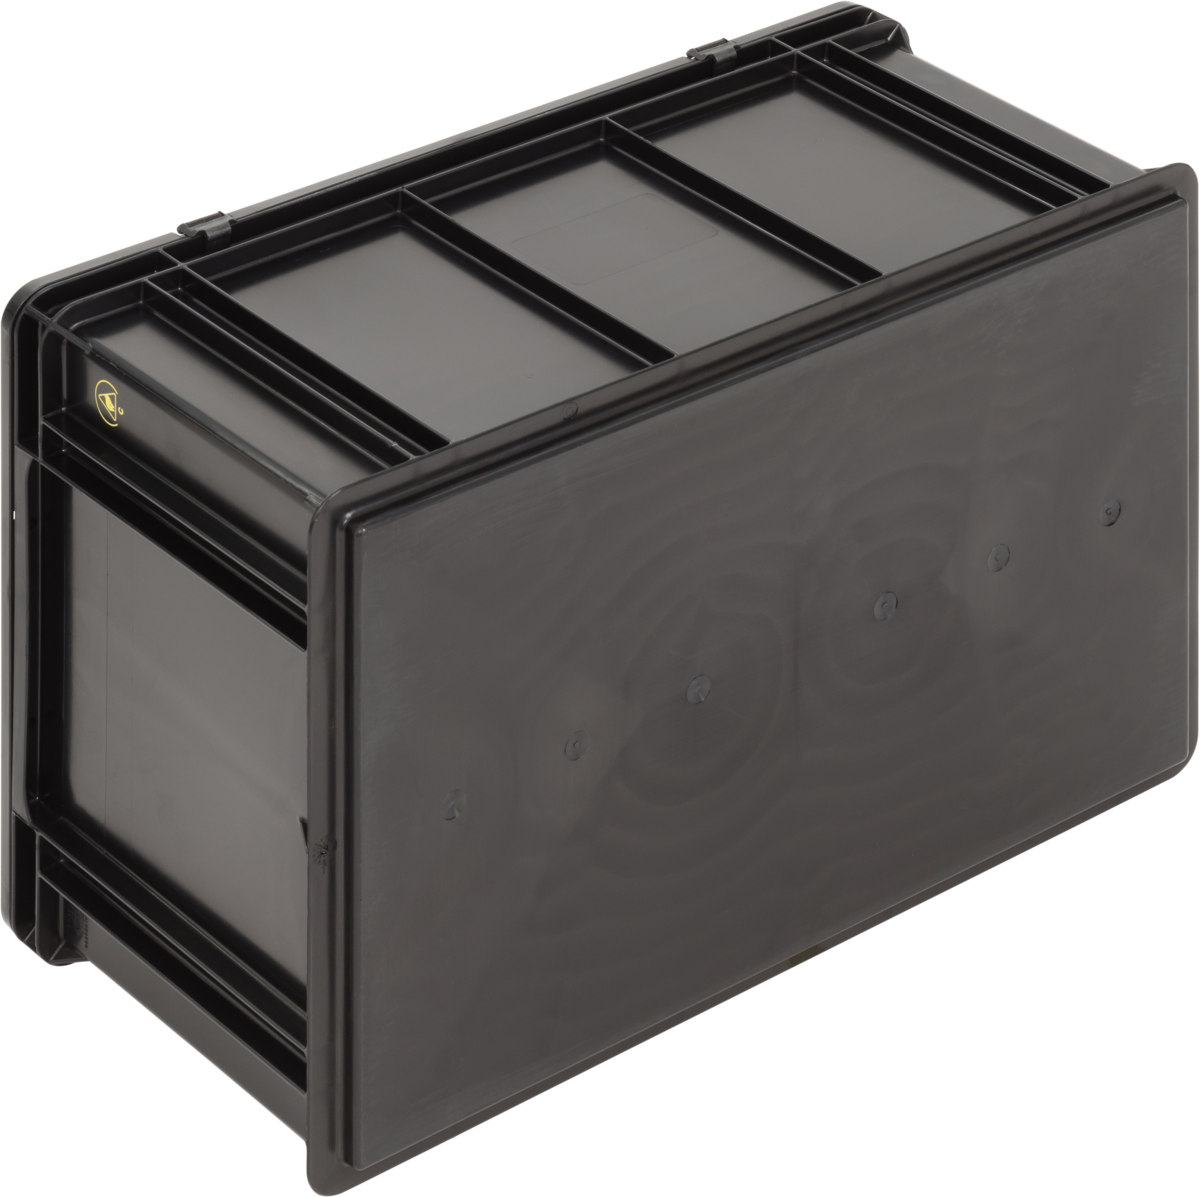 ESD-Safe-SGL-Norm-Carrying-Cases-Flat-Base-007-Ref.-6426.397.992_1004511_600x400x288_02